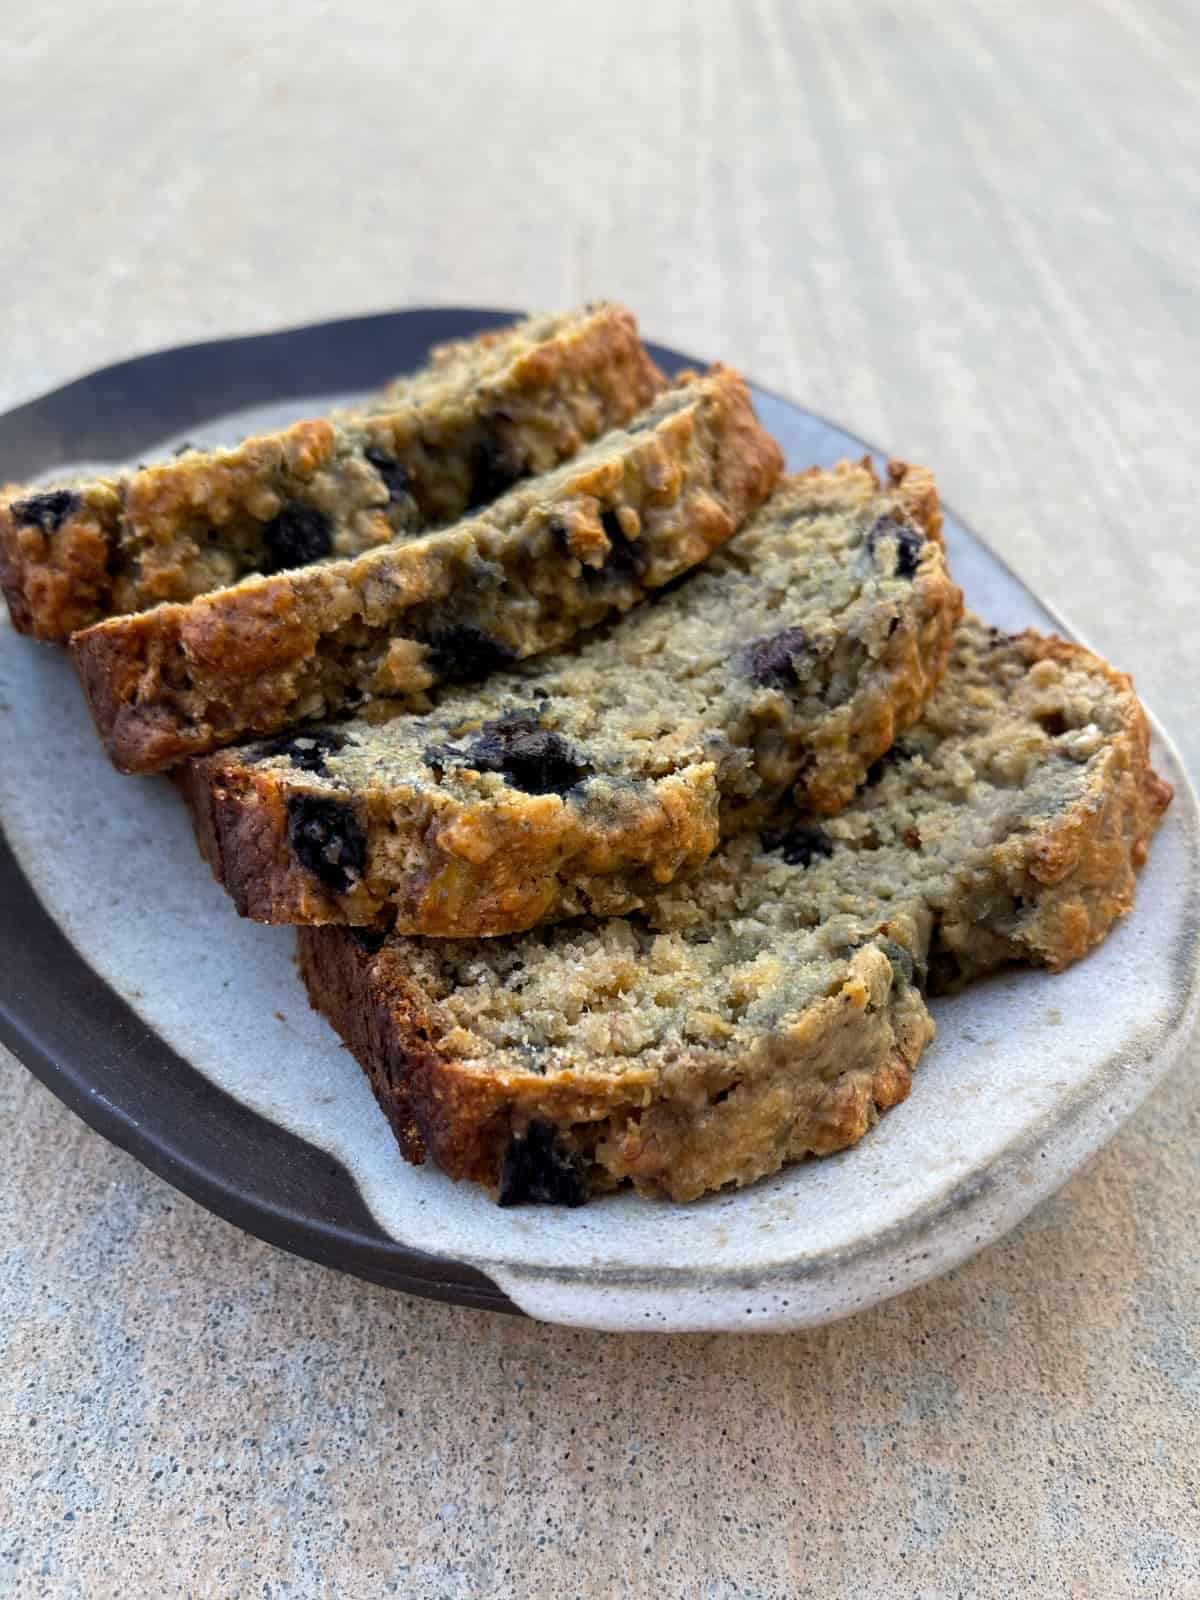 Blueberry banana bread slices on pottery plate.